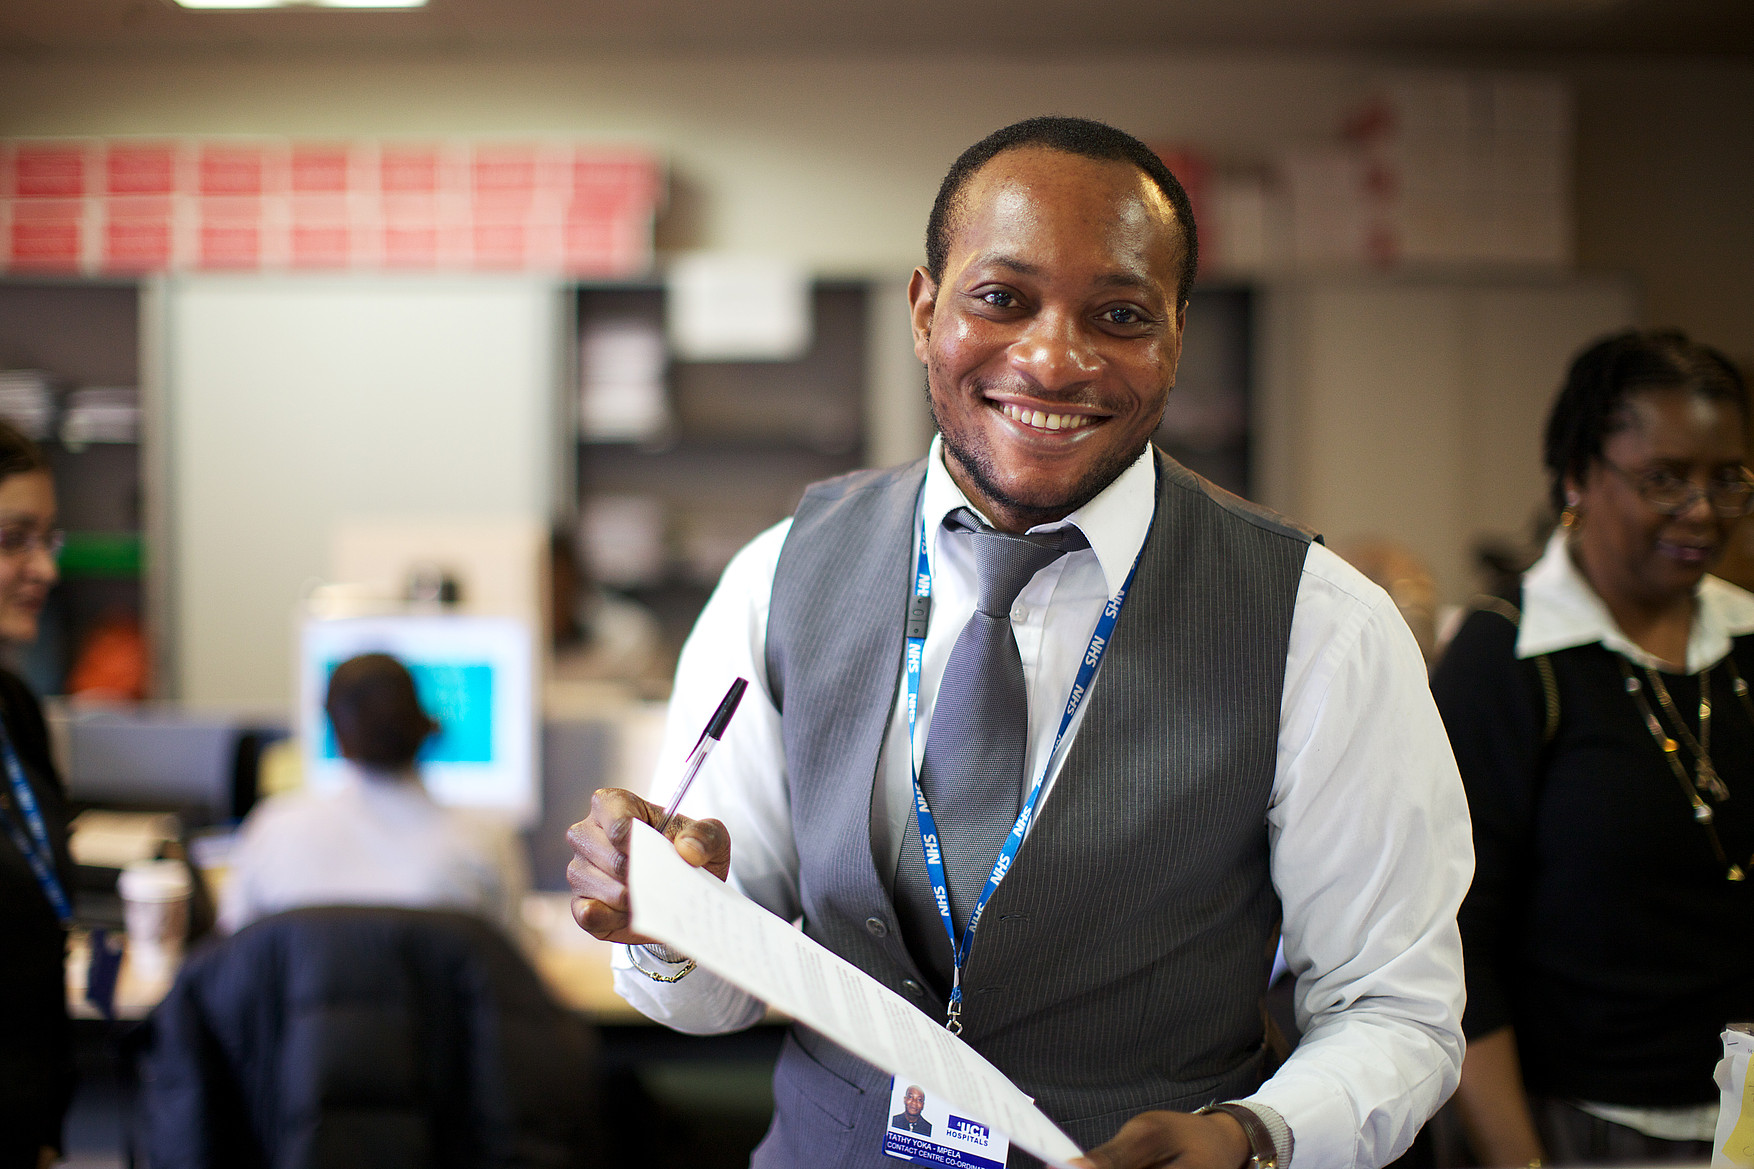 Unique ID: NHS_UCLH_DAY 1 CALL CENTRE_0045 Caption: Hospital administration, office, call centre. A member of staff looking at the camera, smiling, holding paperwork. People working in background. Restrictions: Copyright: ©